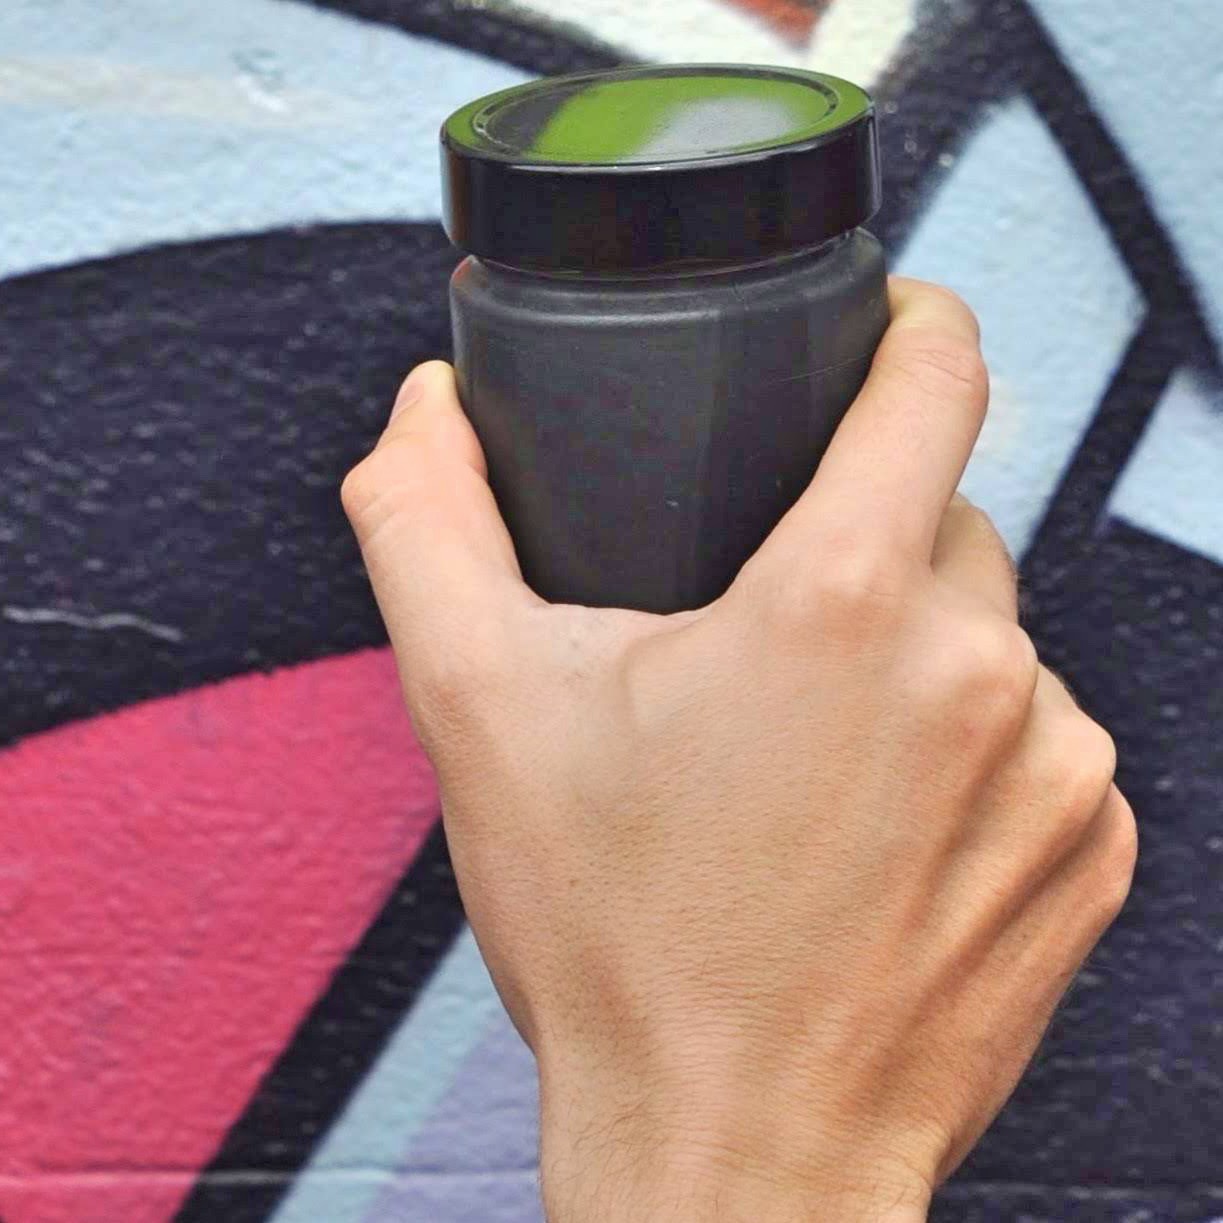 2. Rubber Cuppy Coffee Cup